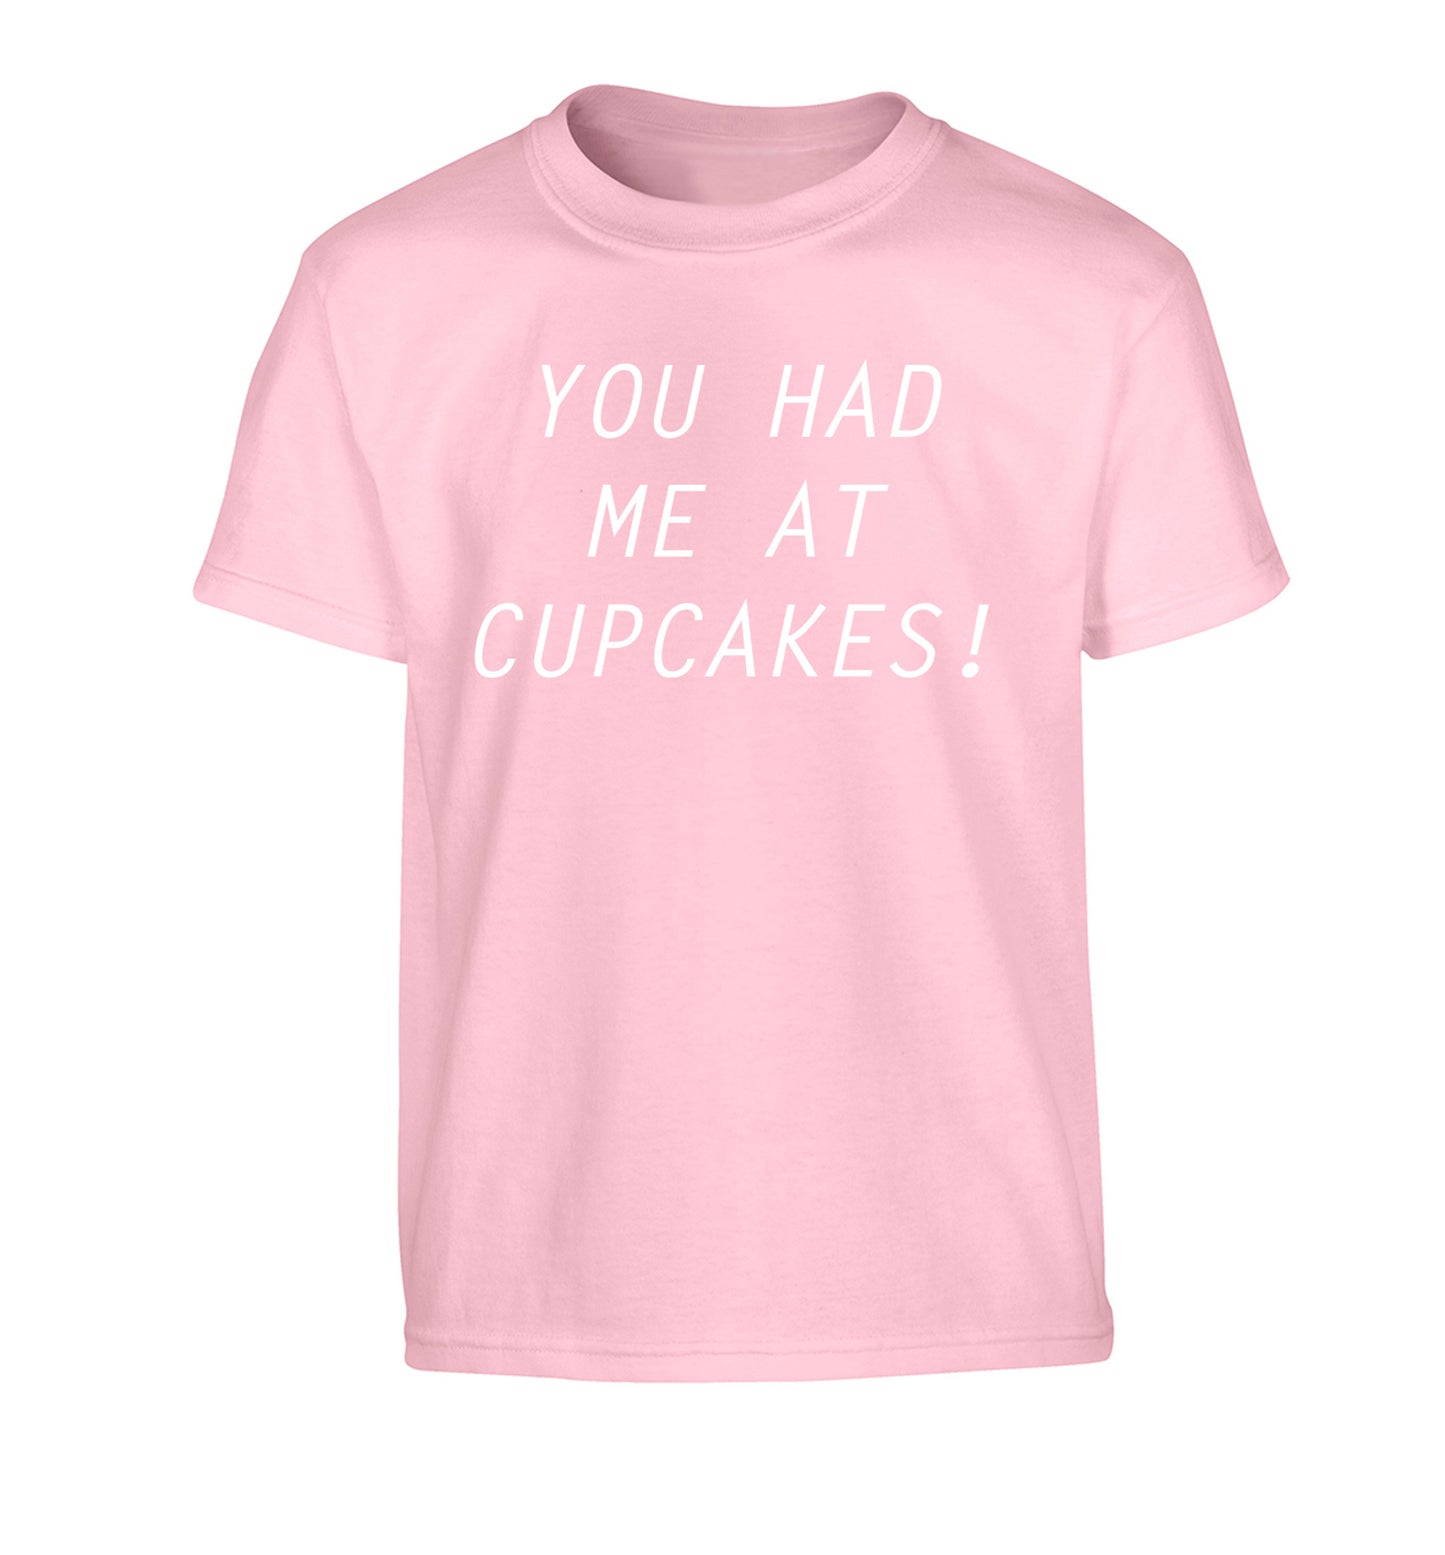 You had me at cupcakes Children's light pink Tshirt 12-14 Years